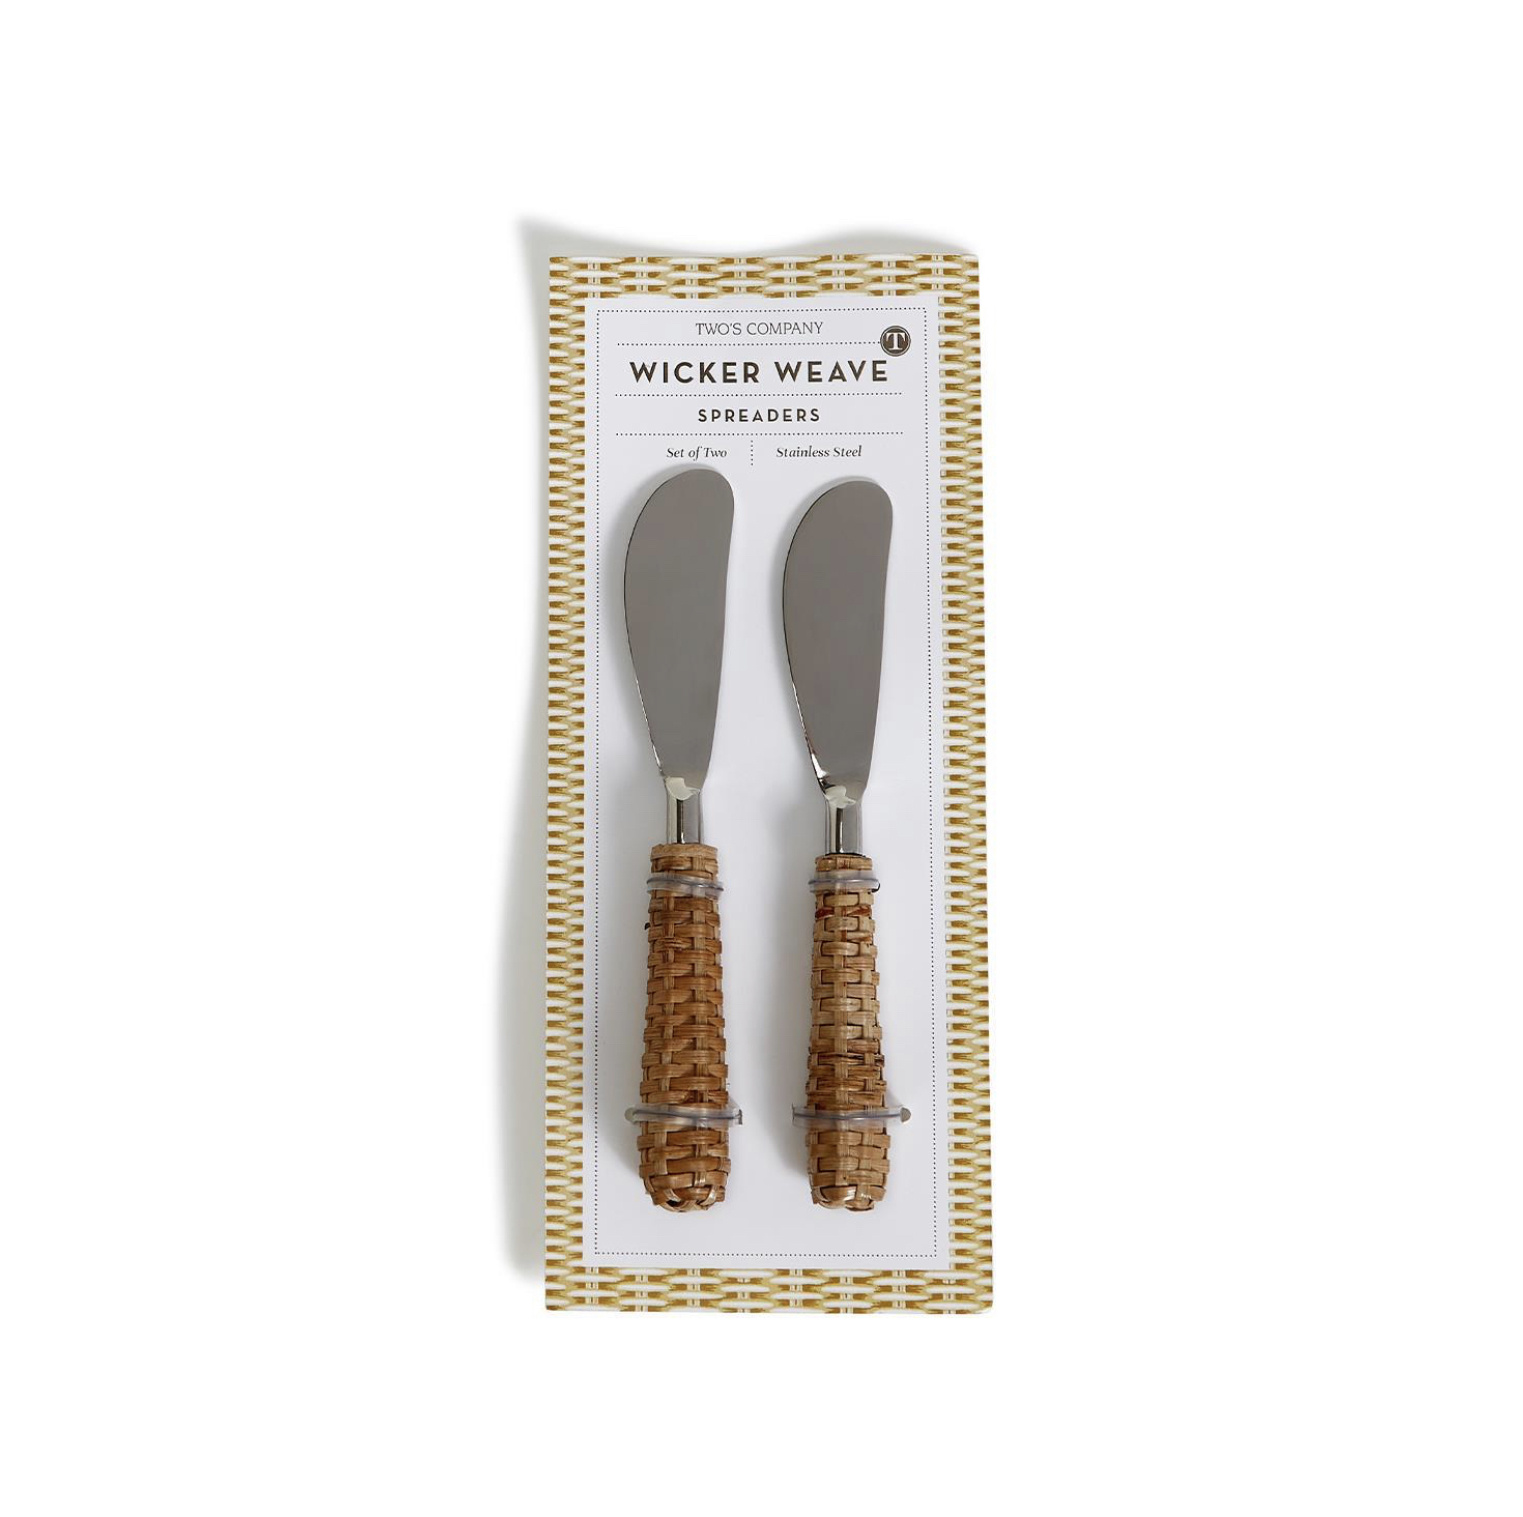 Wicker Weave  Spreaders, Set of 2 on Gift Card, Stainless Steel/Bamboo